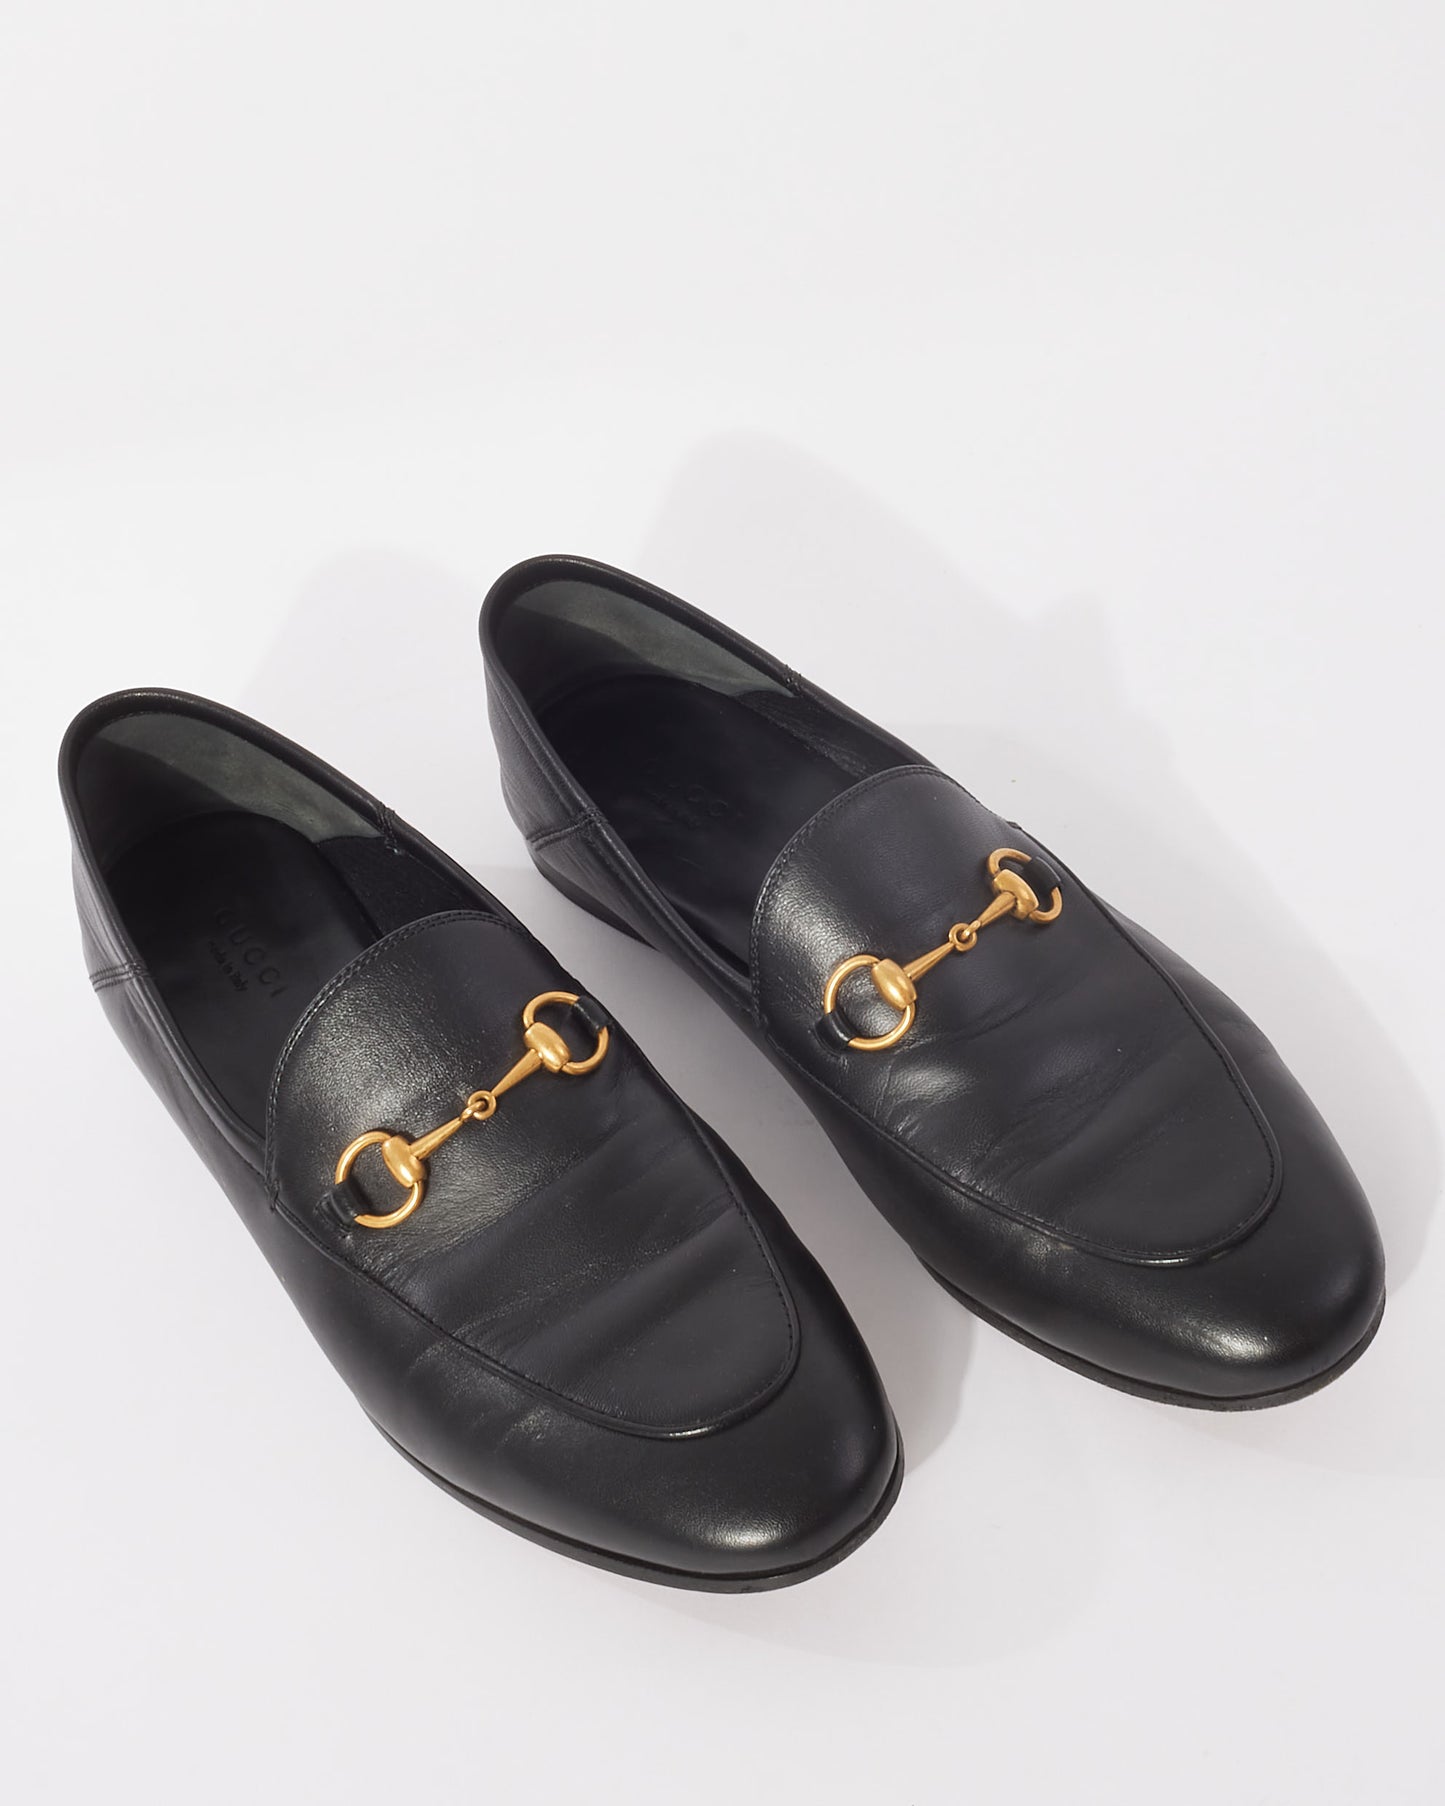 Gucci Black Leather Jordaan Loafers - 39